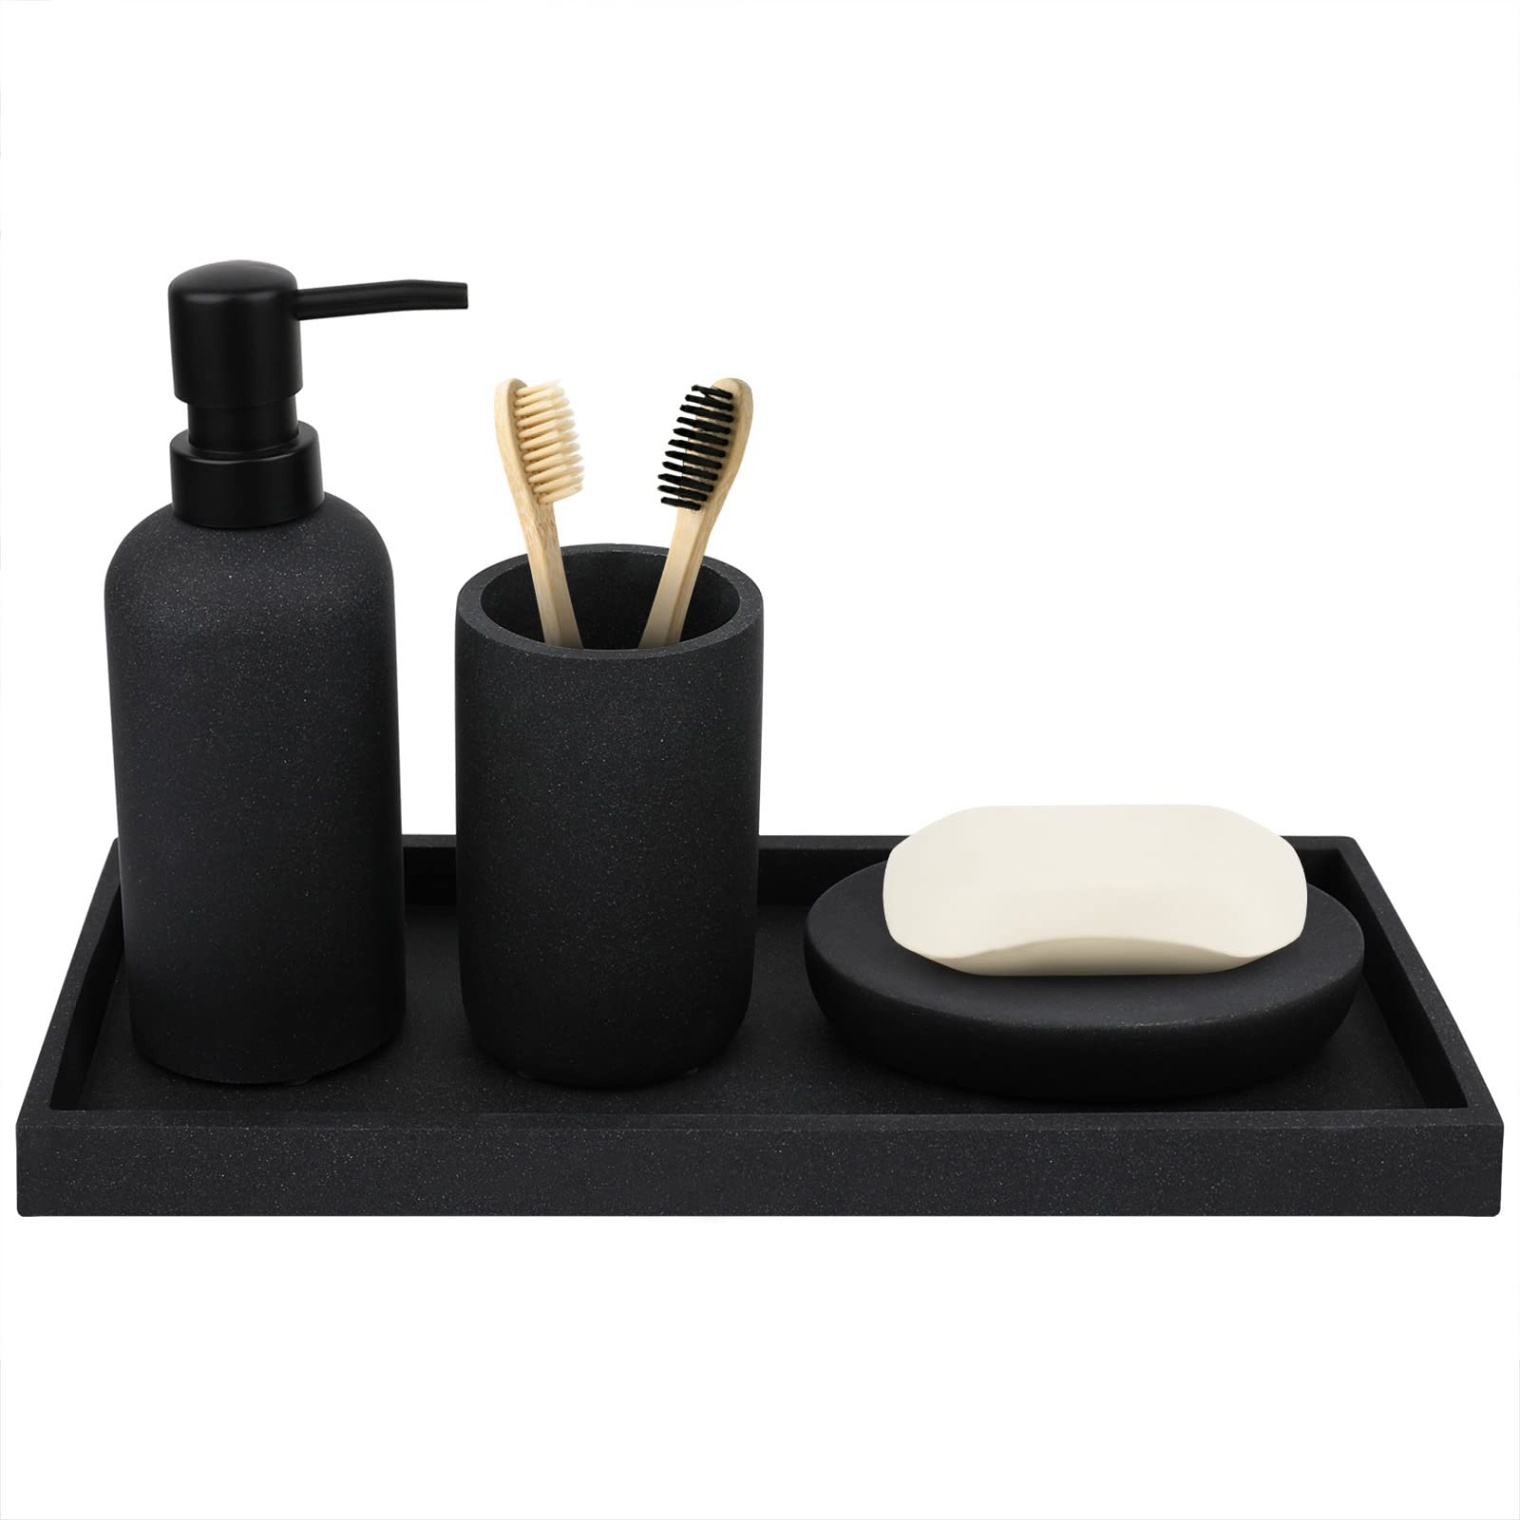 bathroom accessories set with tray Bulan 4 Bathroom Accessory Set- Pcs Complete Resin Bathroom Counter Vanity  Accessories Sets Vanity Tray Lotion Dispenser/Soap Pump Toothbrush Holder  Soap